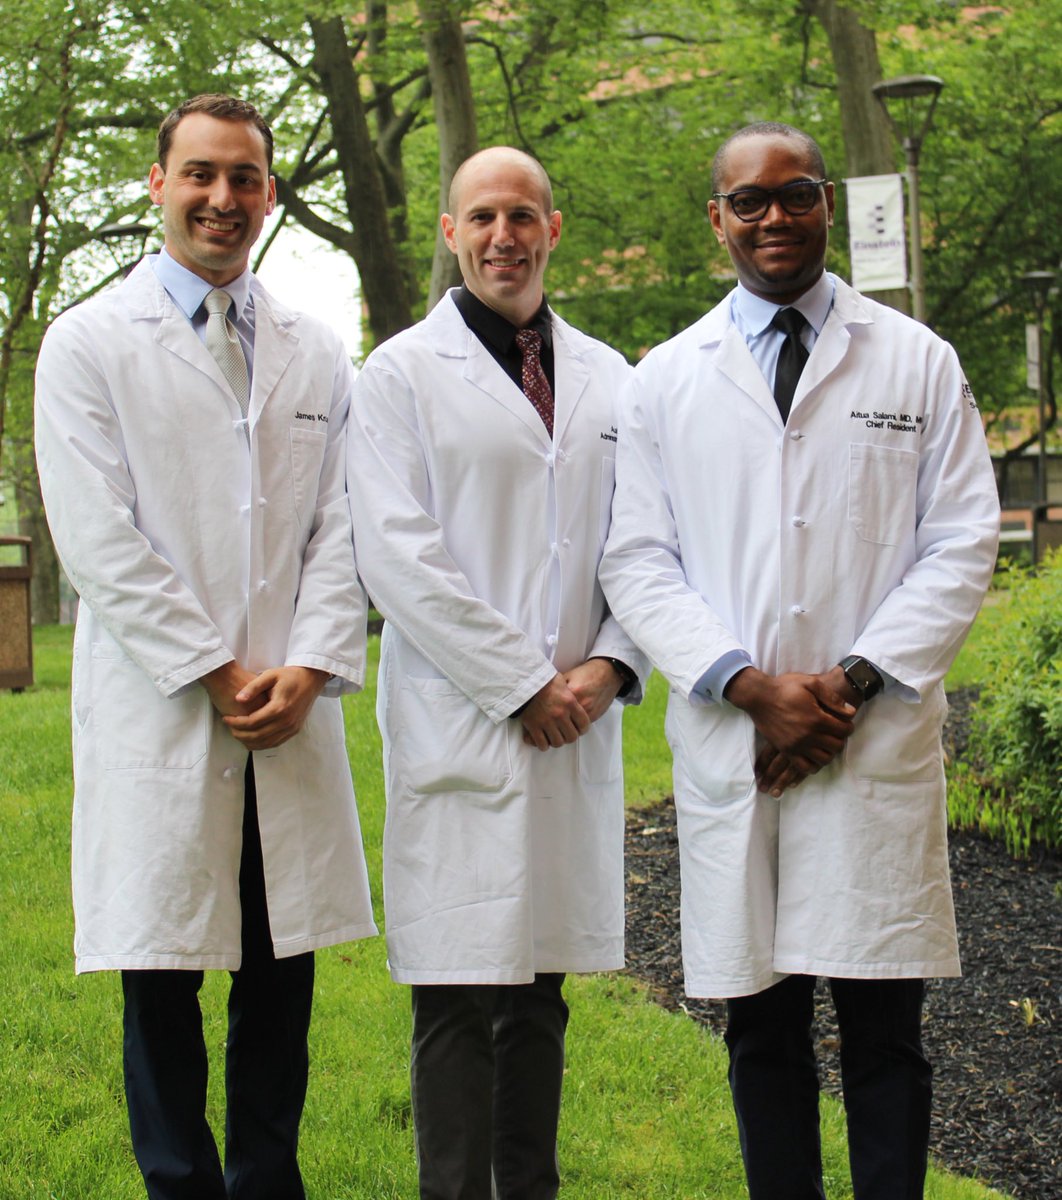 Getting close to graduating these three incredibly talented @SurgeryEinstein chief residents: Drs. James Krupp, Austin Goetz, and Aitua Salami. @ringforceps